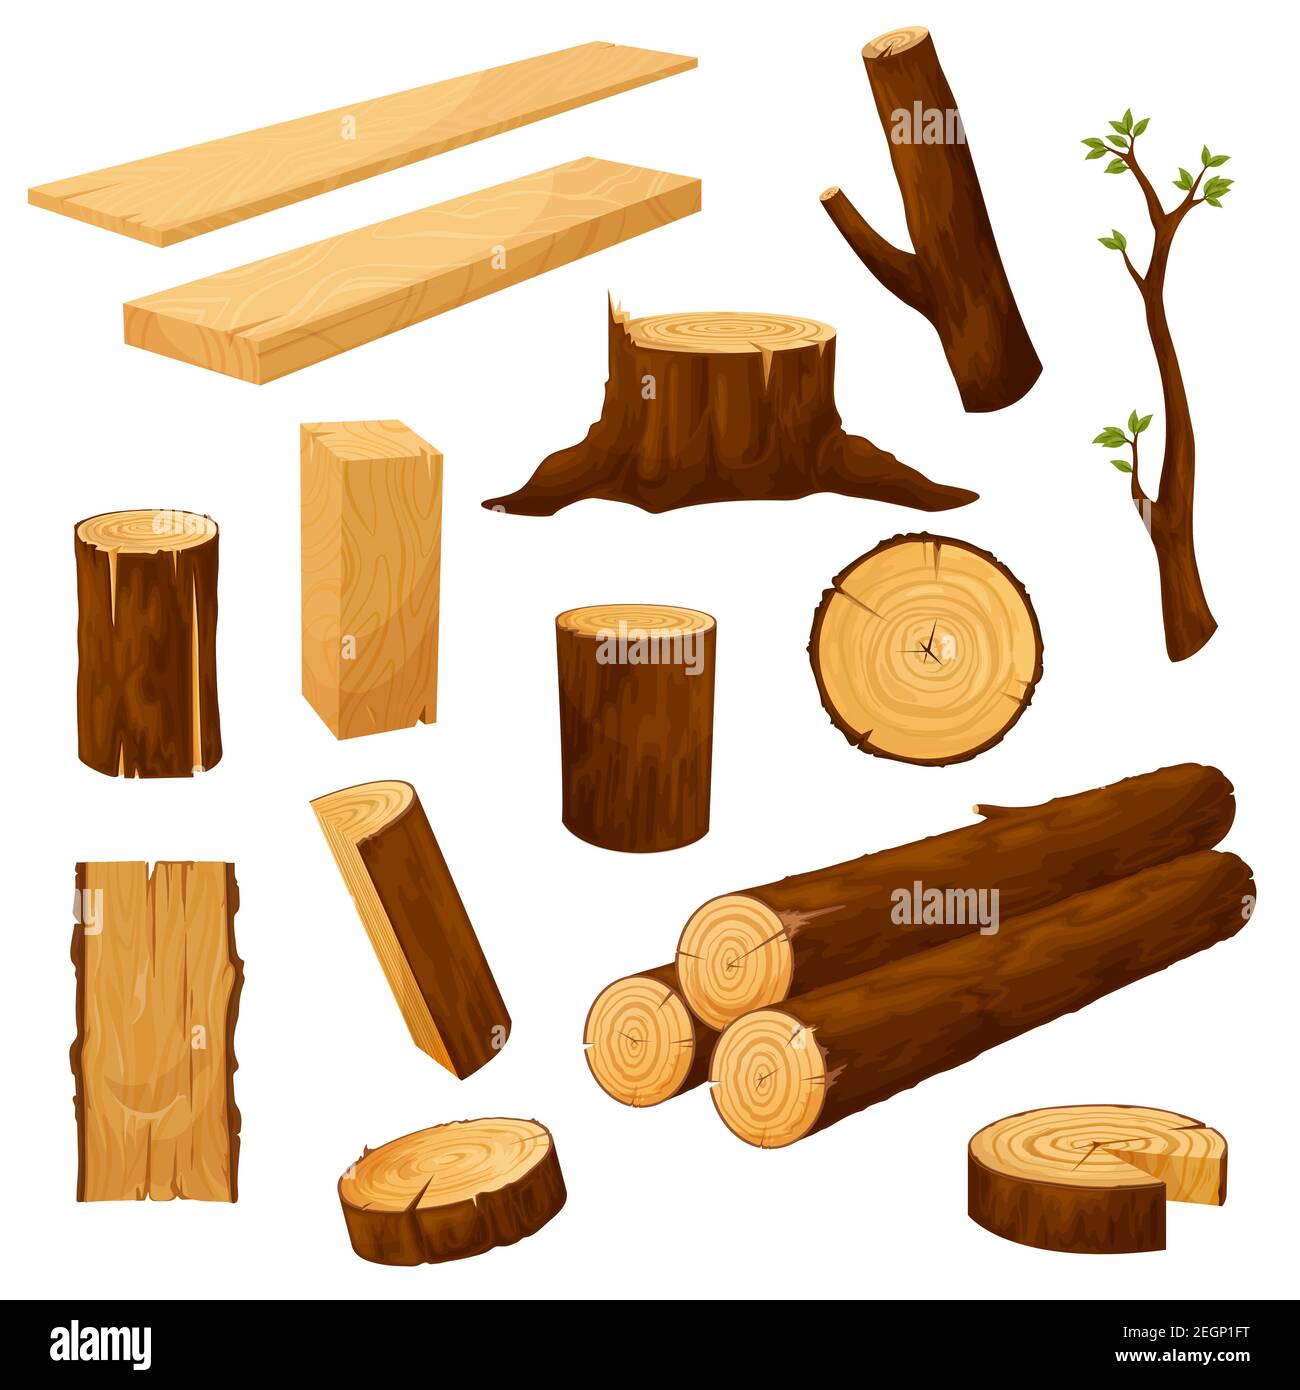 Tree stump, timber materials and wooden logs. Wooden plank, beam and billet, tree branch with leaves and cutted wood piece, firewood chunk cartoon vec Stock Vector